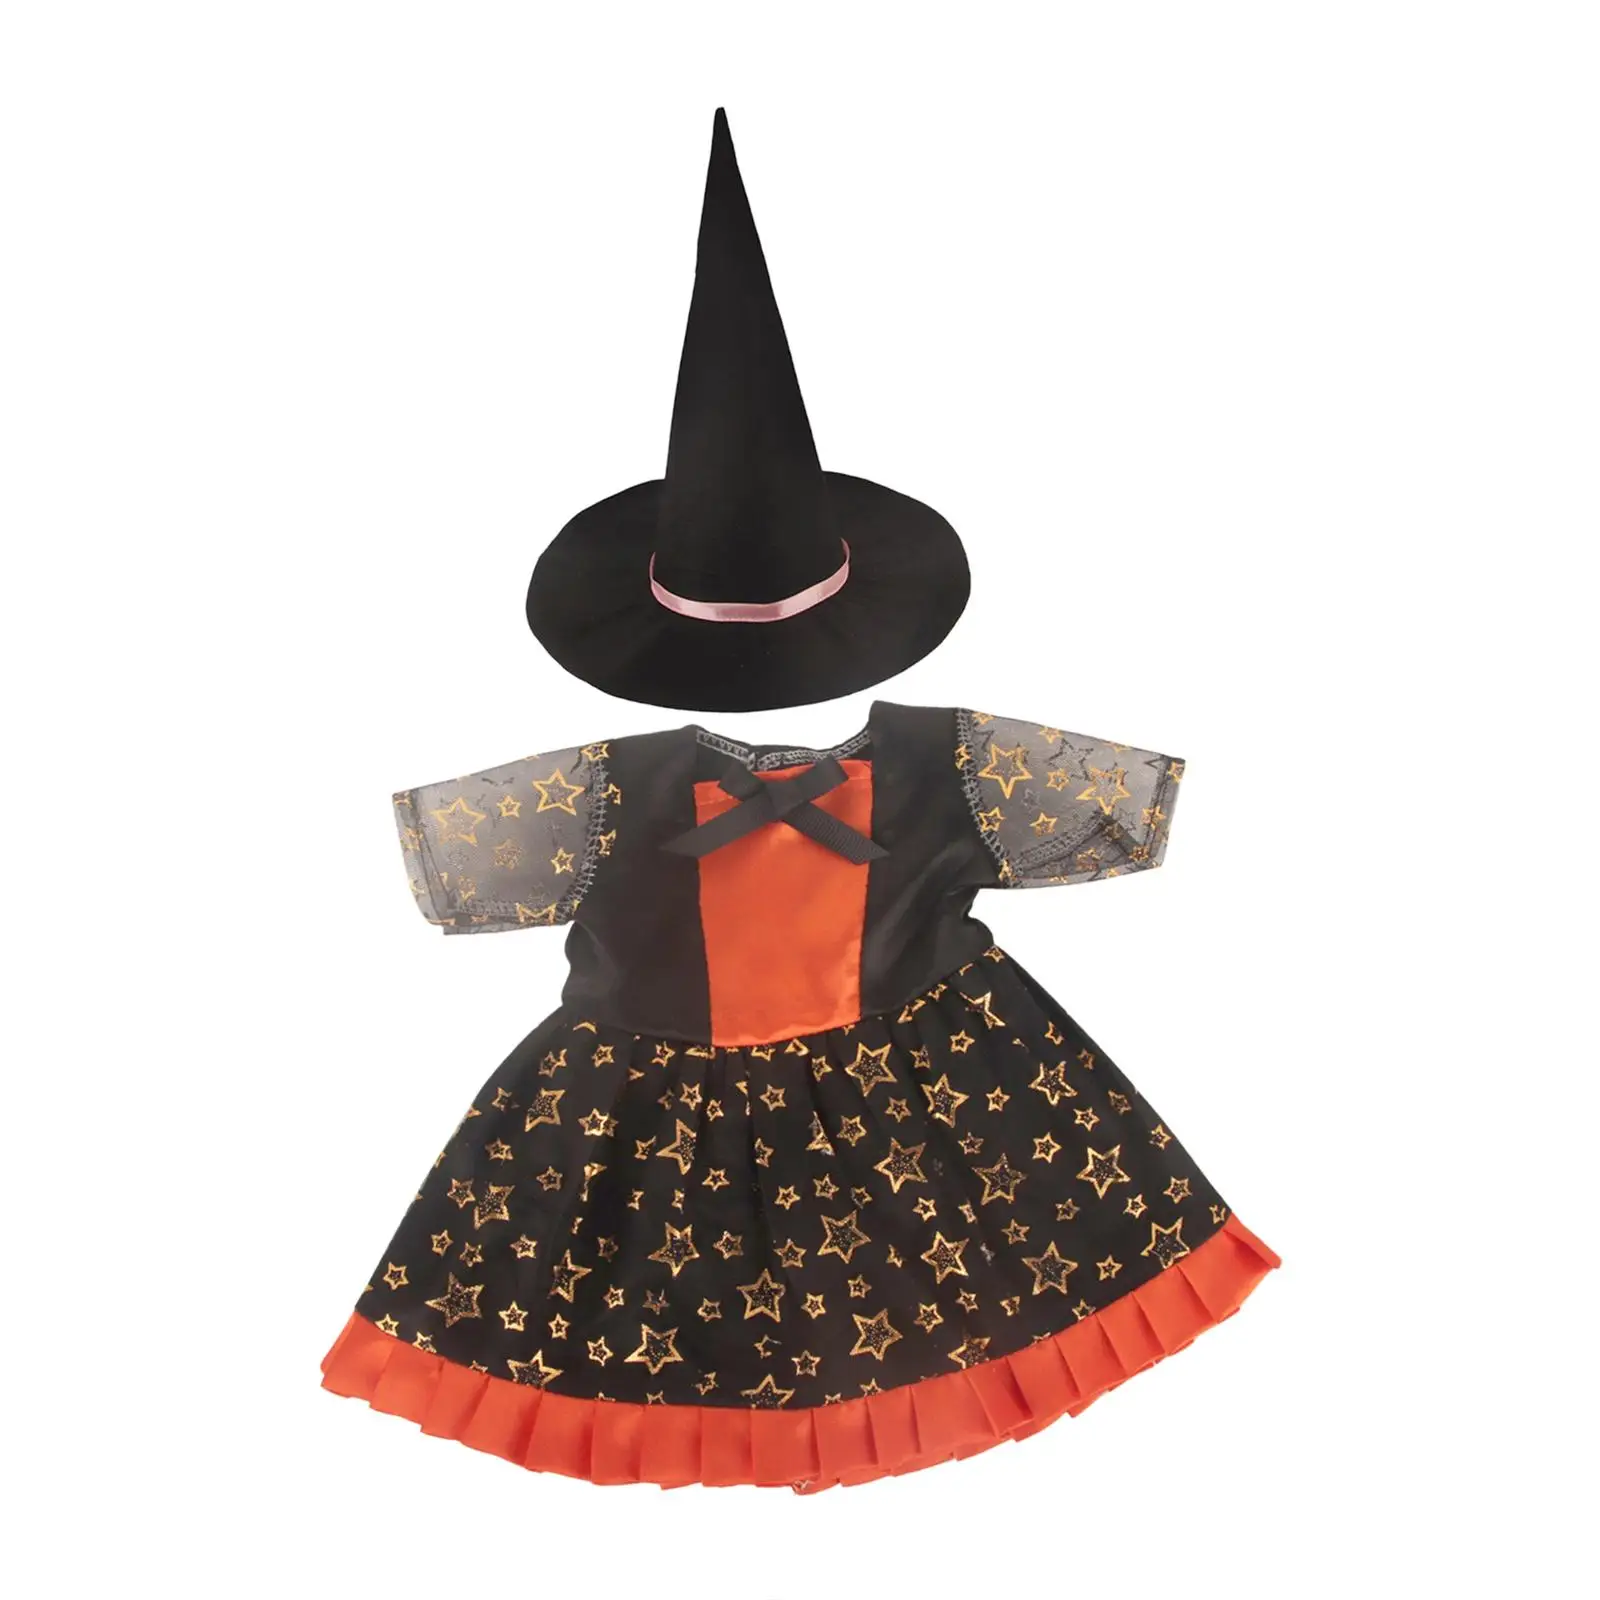 18 inch Girl Doll Dress Hat Outfit for Carnivals Dress up Party Activity